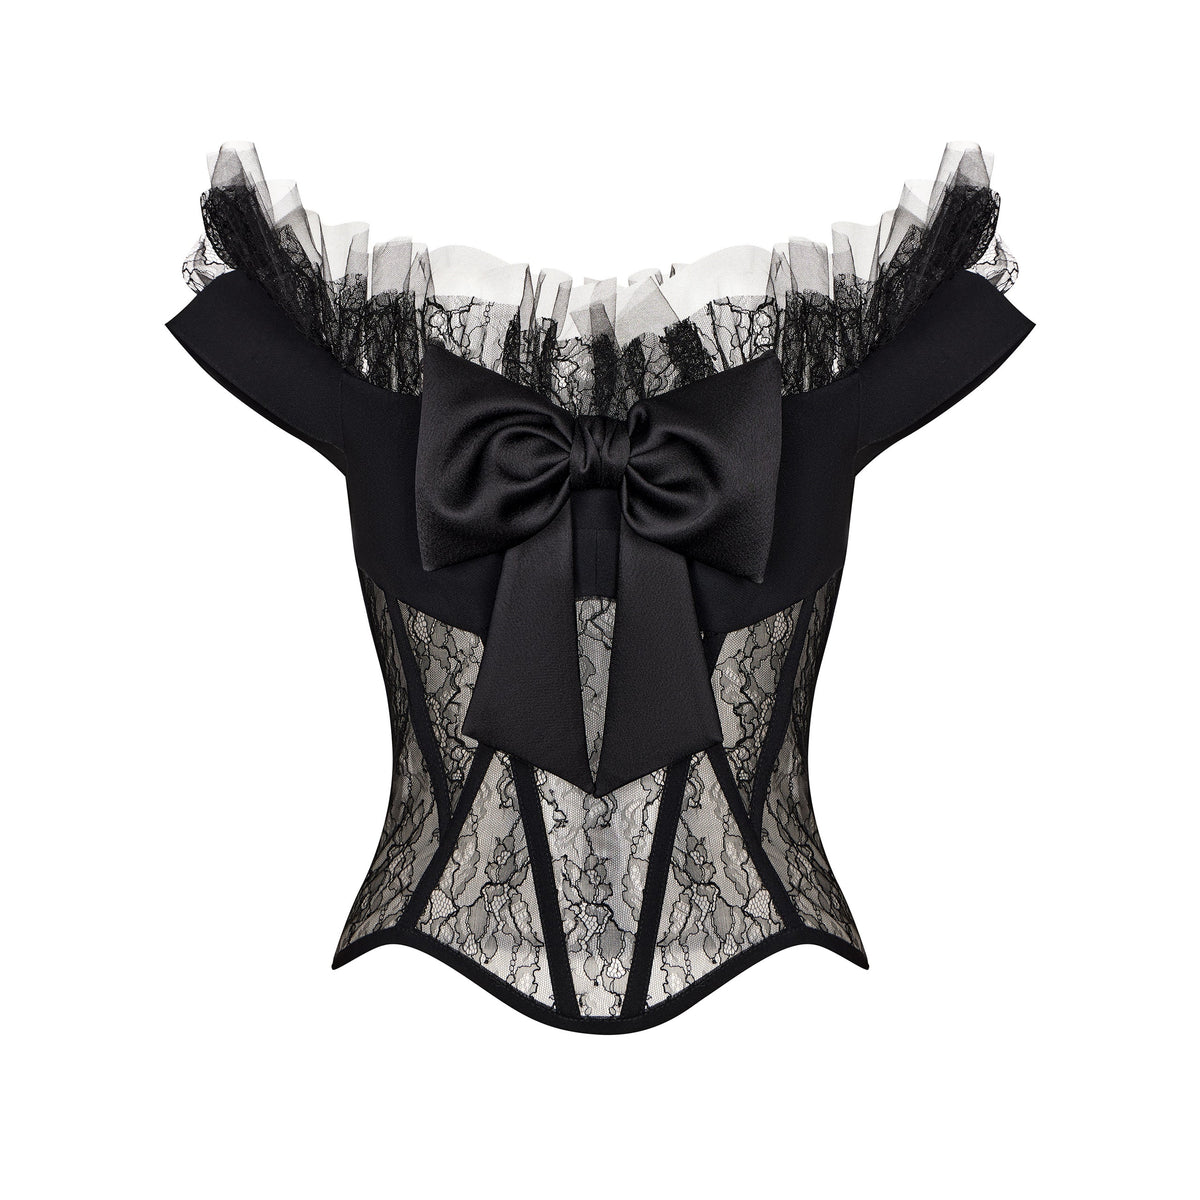 Crepe and lace corset top with ruffled tulle and bow Black RC23S038A001 -  buy at the online boutique RozieCorsets